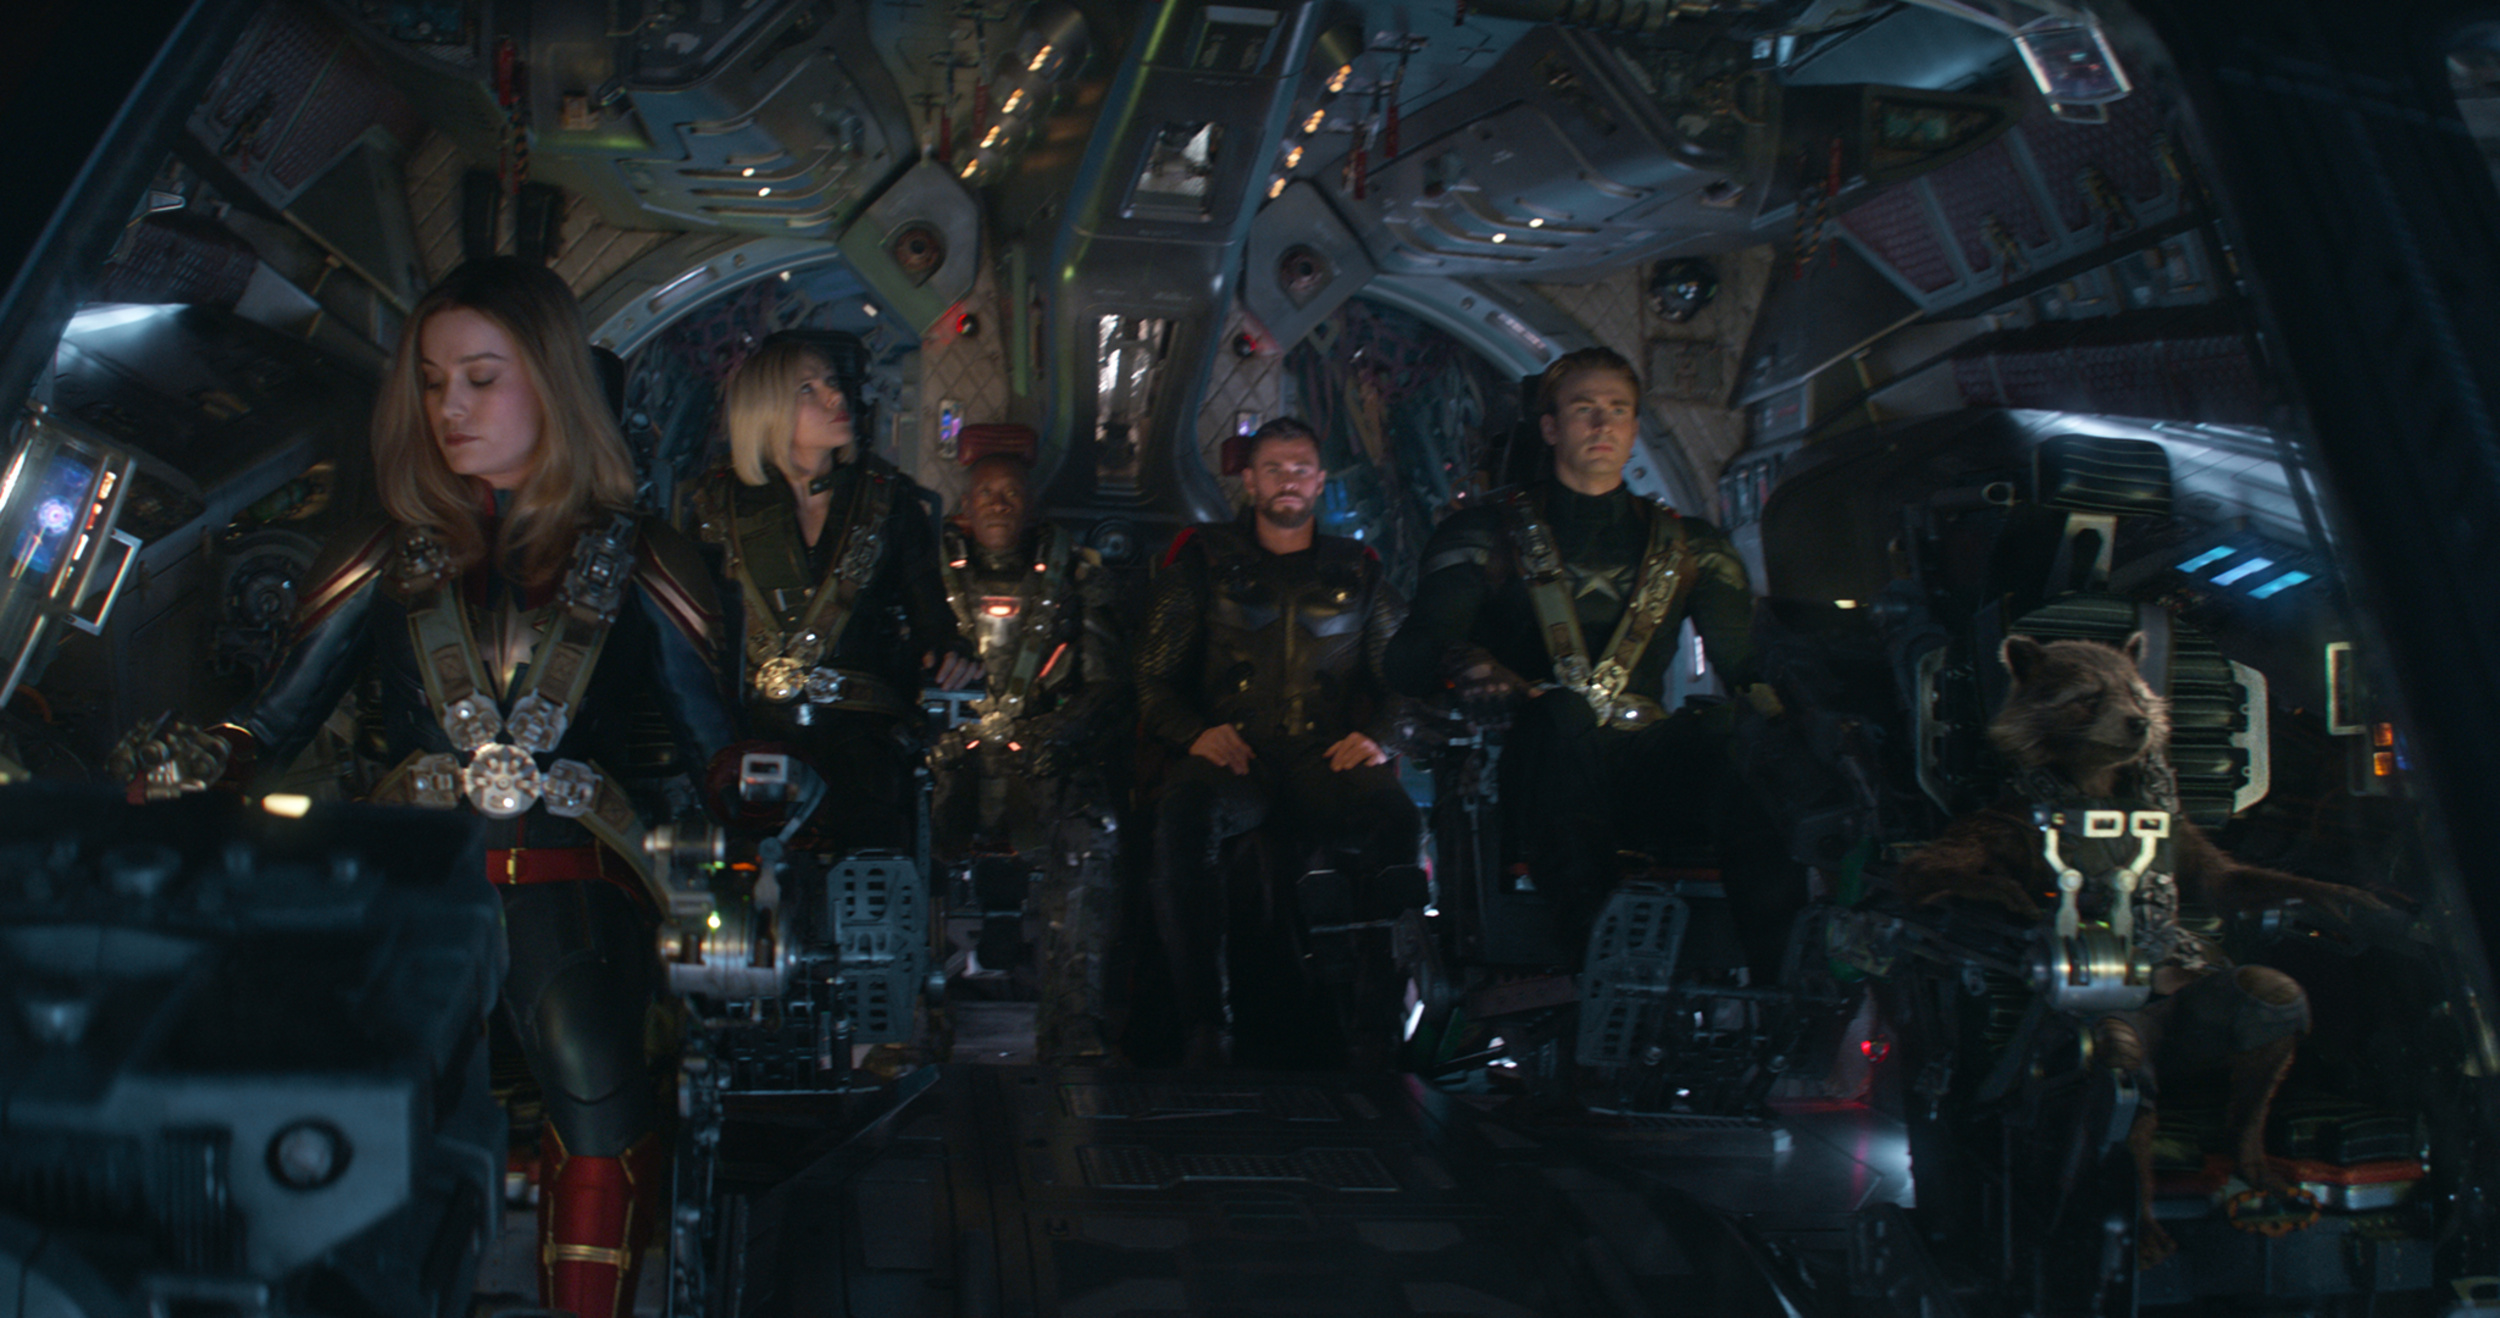 <p>It all came down to this. Sure, <em>Avengers: Endgame</em> was technically not the last film of the first era of the Marvel Cinematic Universe, just the penultimate title. However, the last movie, <em>Spider-Man: Far from Home</em>, exists entirely in the wake of <em>Endgame</em>. This is what everything was building toward, and when the dust settled (not Thanos finger-snapping dust, for the record), <em>Endgame</em> delivered on the bombast…and the box office. Here are 20 facts about <em>Endgame</em> that are just the beginning.</p>